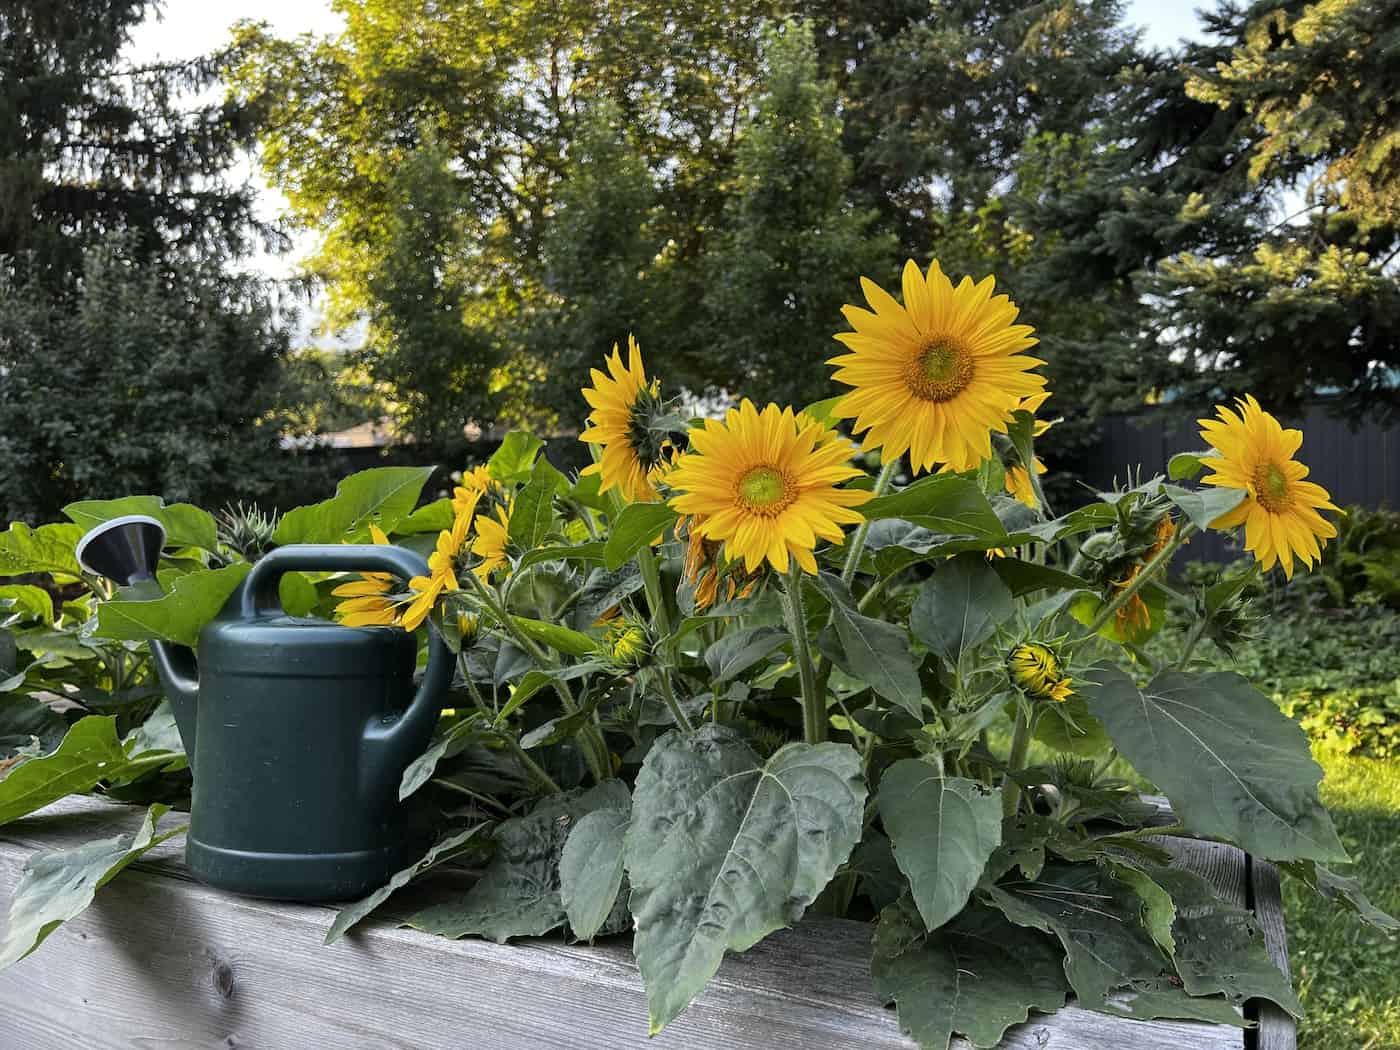 Growing sunflowers - mary jane duford1185